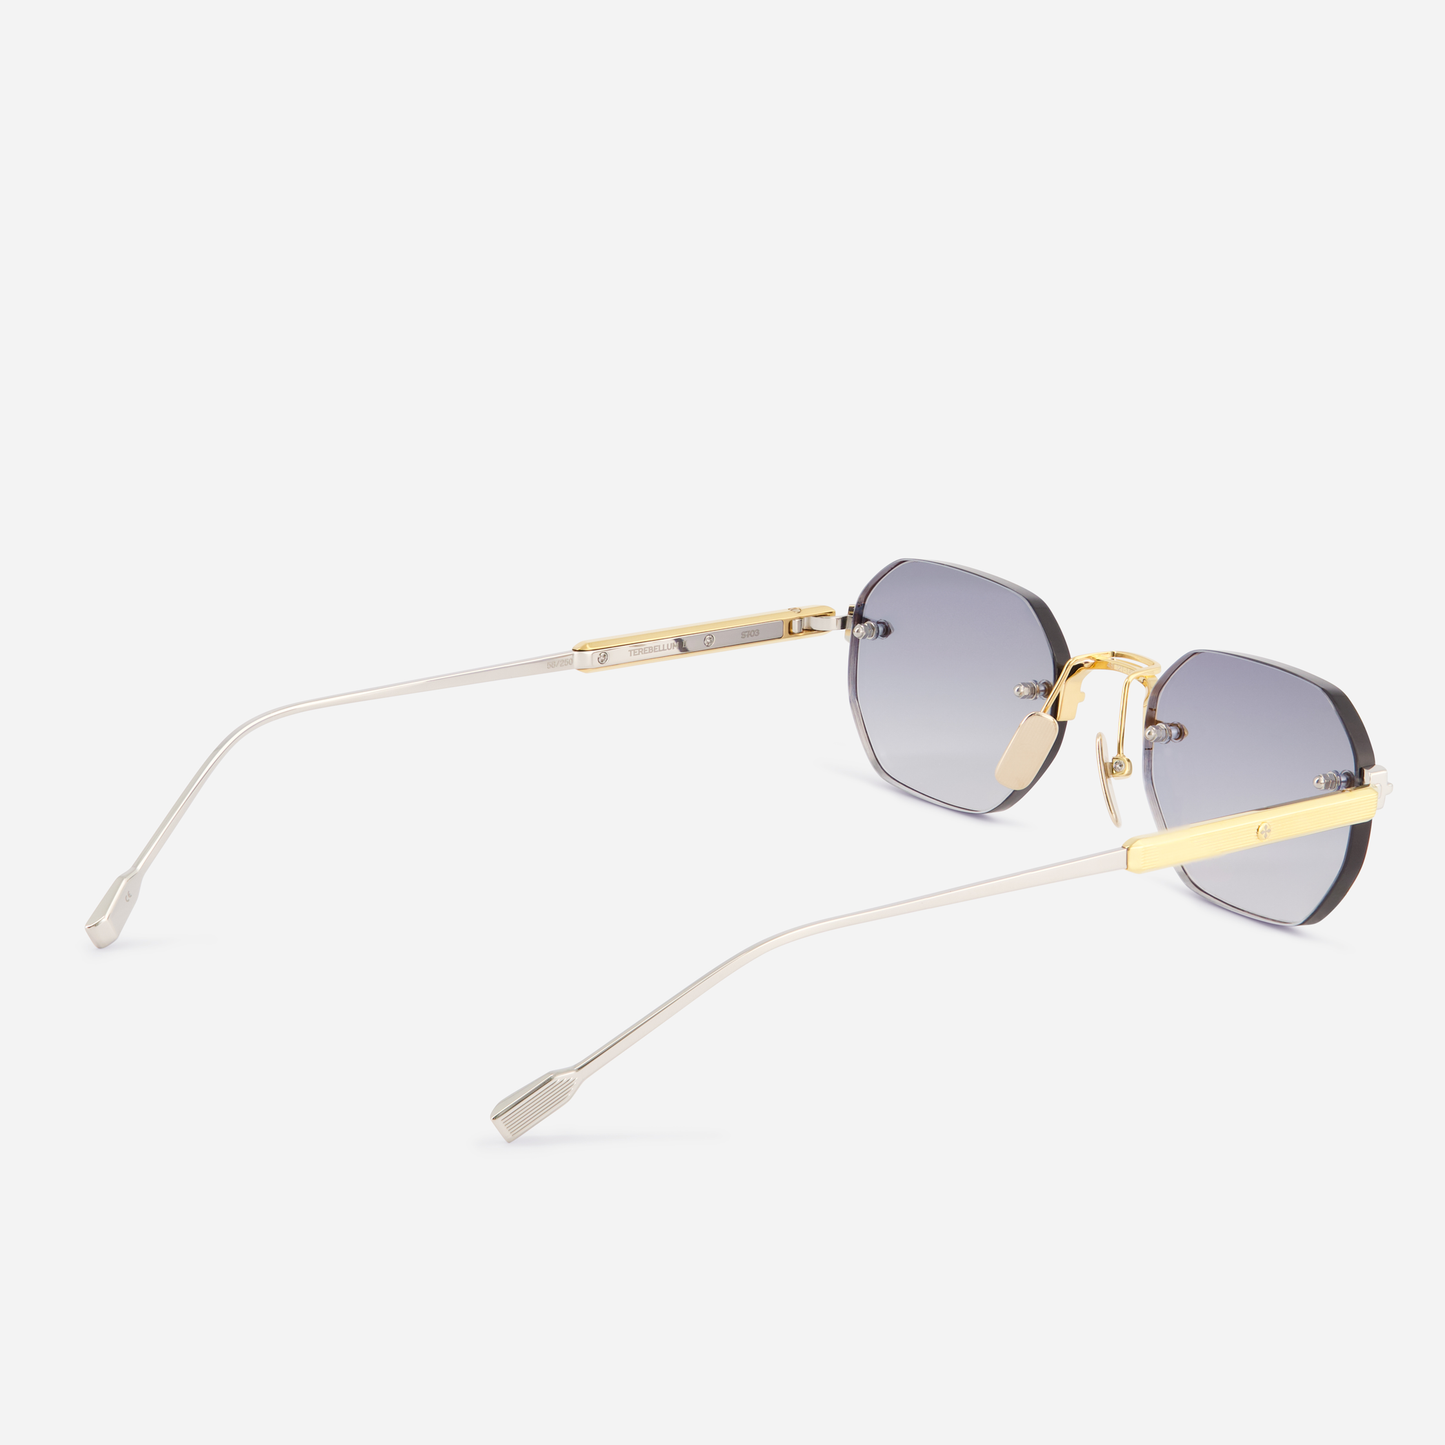 The Terebellum II S703, featuring a distinctive rounded hexagonal rimless shape, yellow gold and platinum details, and stylish blue lenses, embodies the perfect fusion of style and luxury.